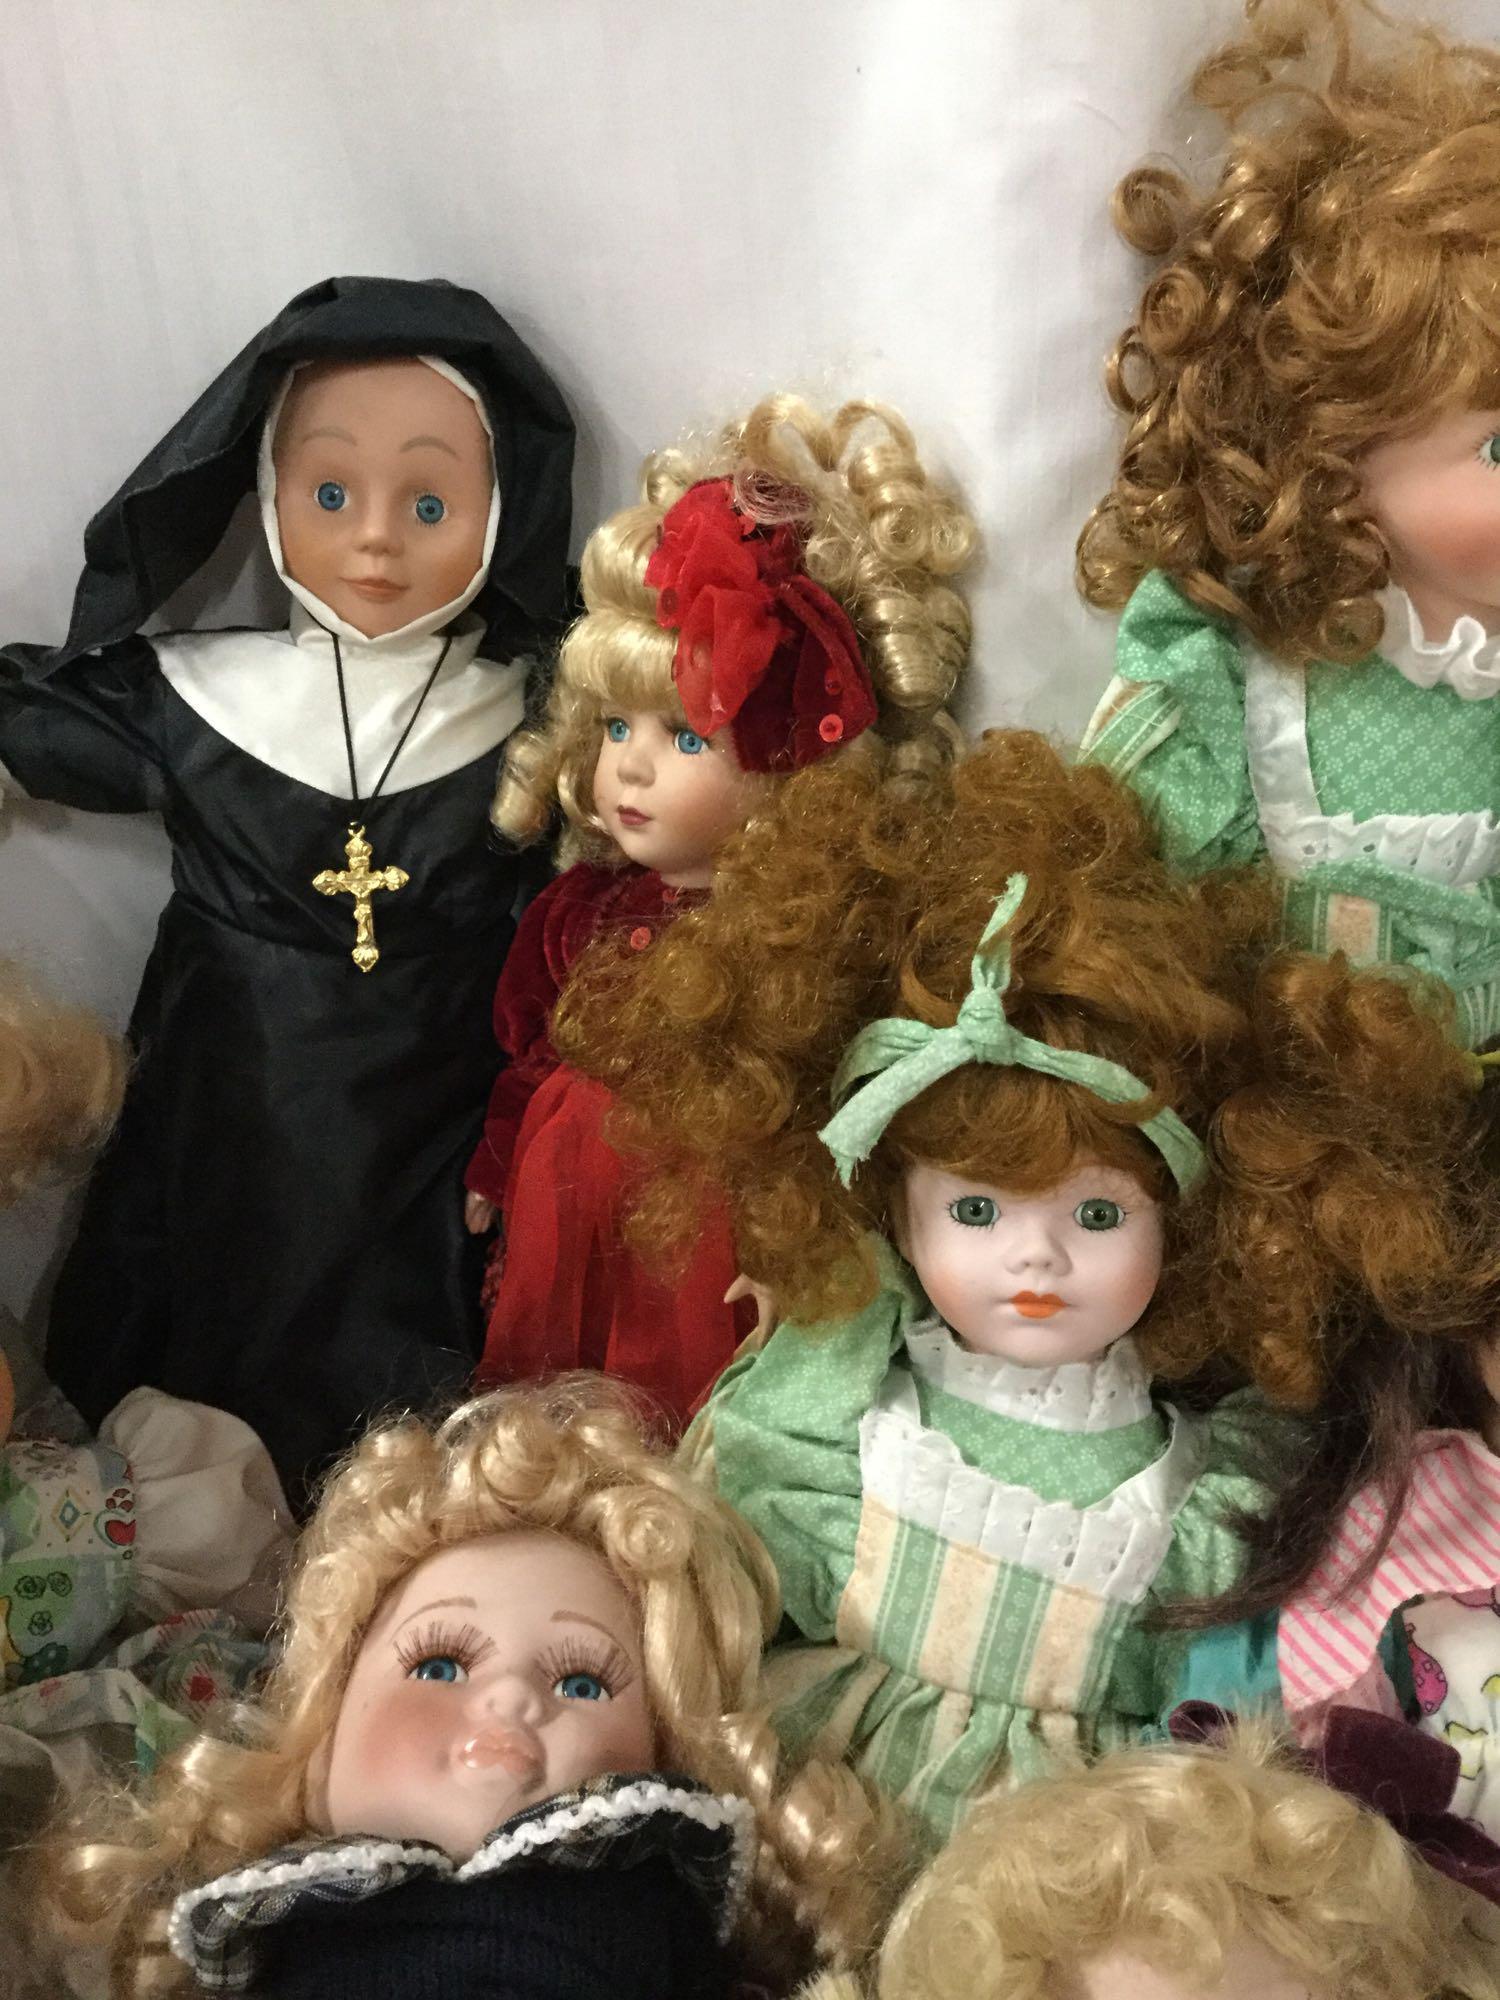 Fifteen composite, porcelain, and vinyl dolls from Heritage Mint, Seymour Mann, Sugar Loaf, and